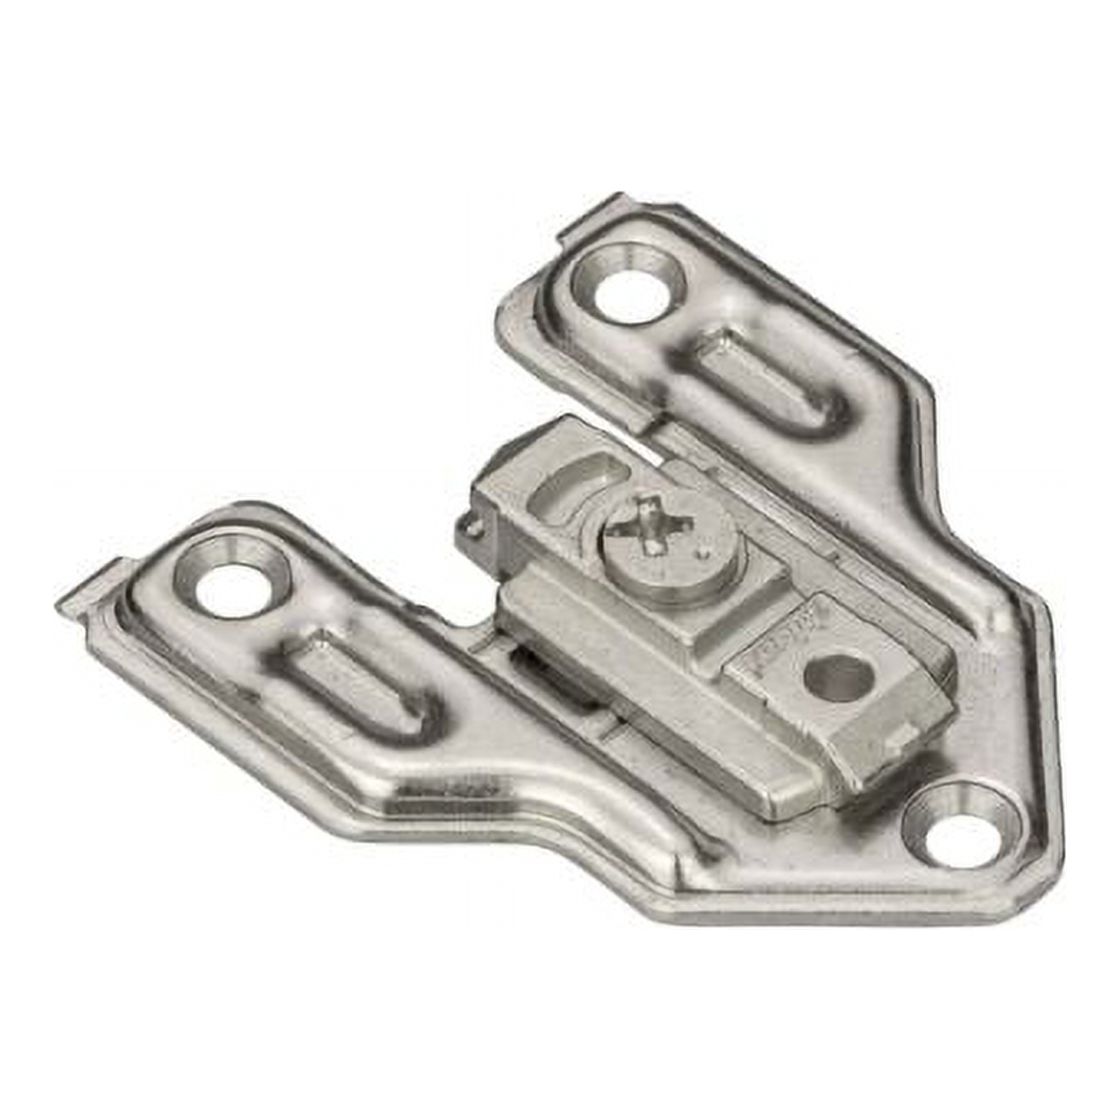 Blum 50-Pack Clip Face Frame Screw-on 0mm Mounting Plate, Nickel Plated - image 1 of 3